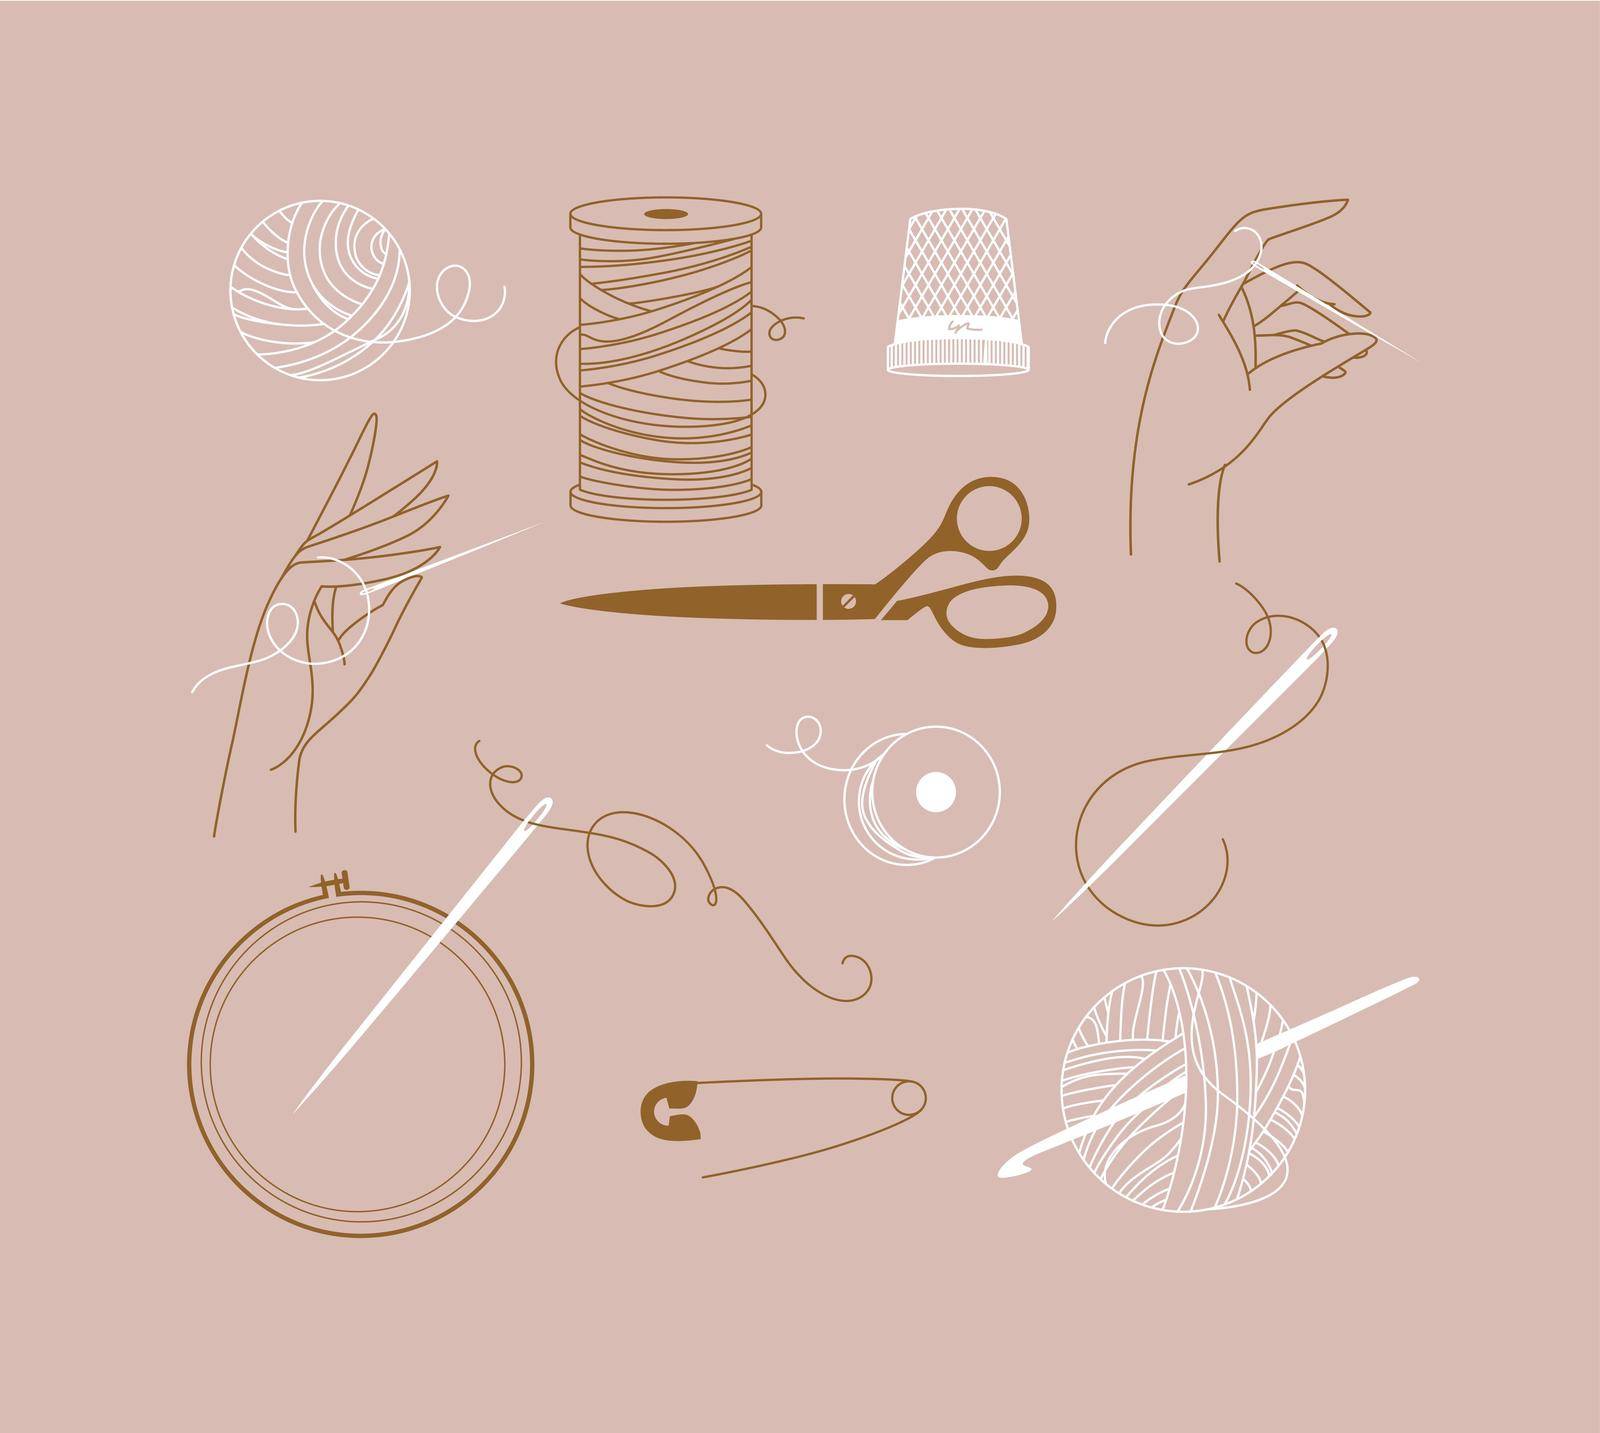 Sewing symbols thread, needle, scissors, pin, thimble, knitting, hand, spool, babin, tambour, crochet, hook in a classic sophisticated style peach color